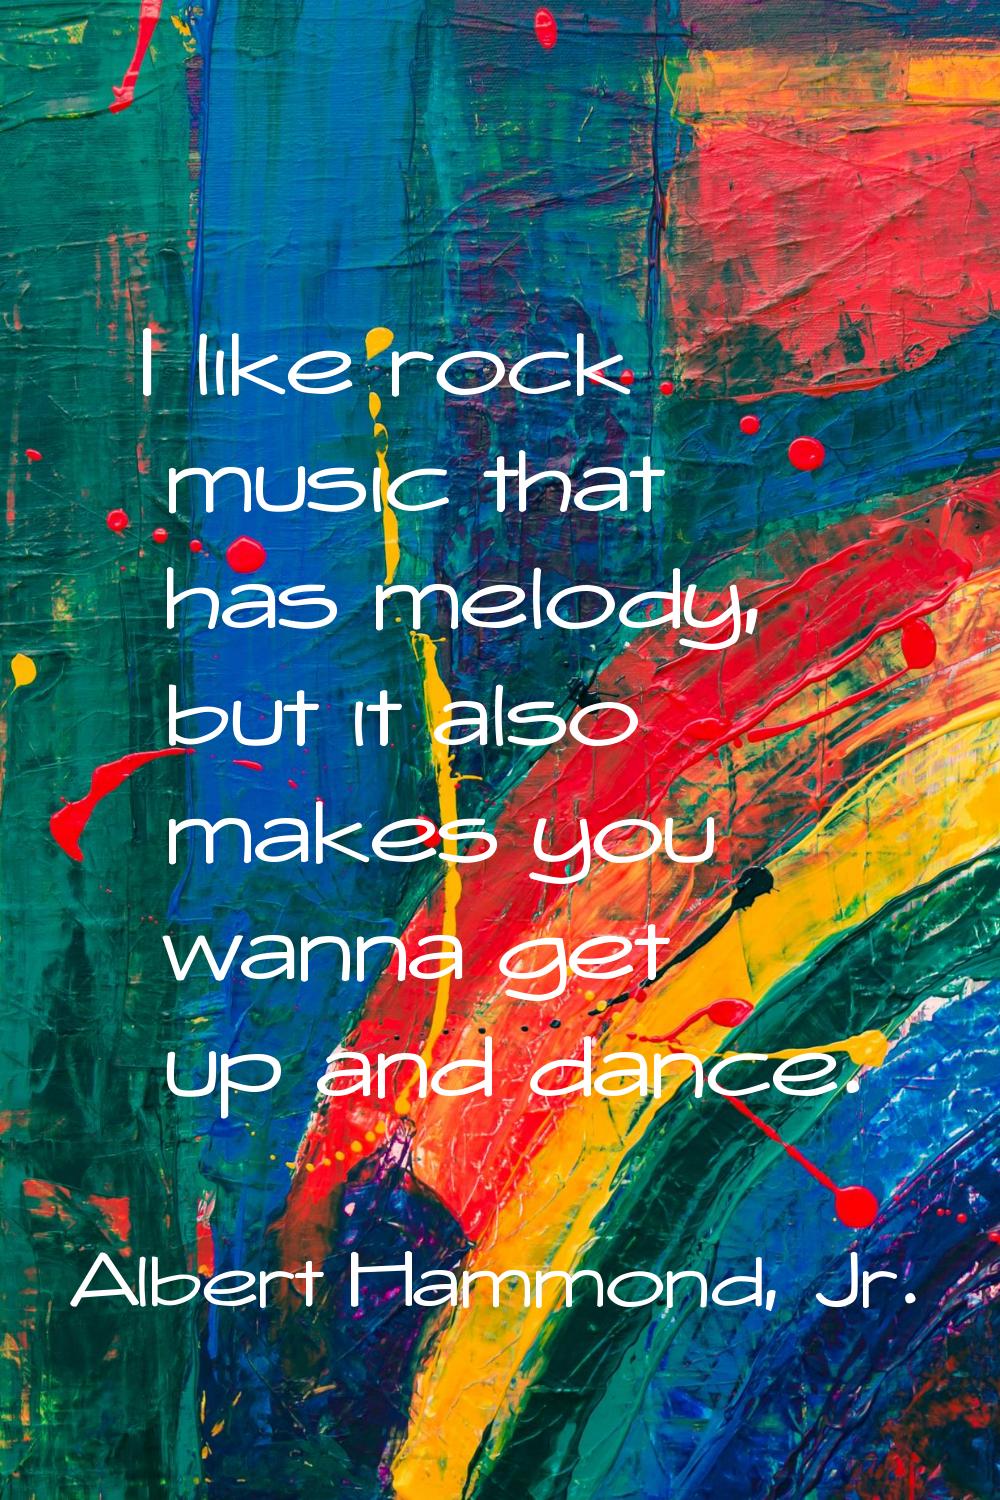 I like rock music that has melody, but it also makes you wanna get up and dance.